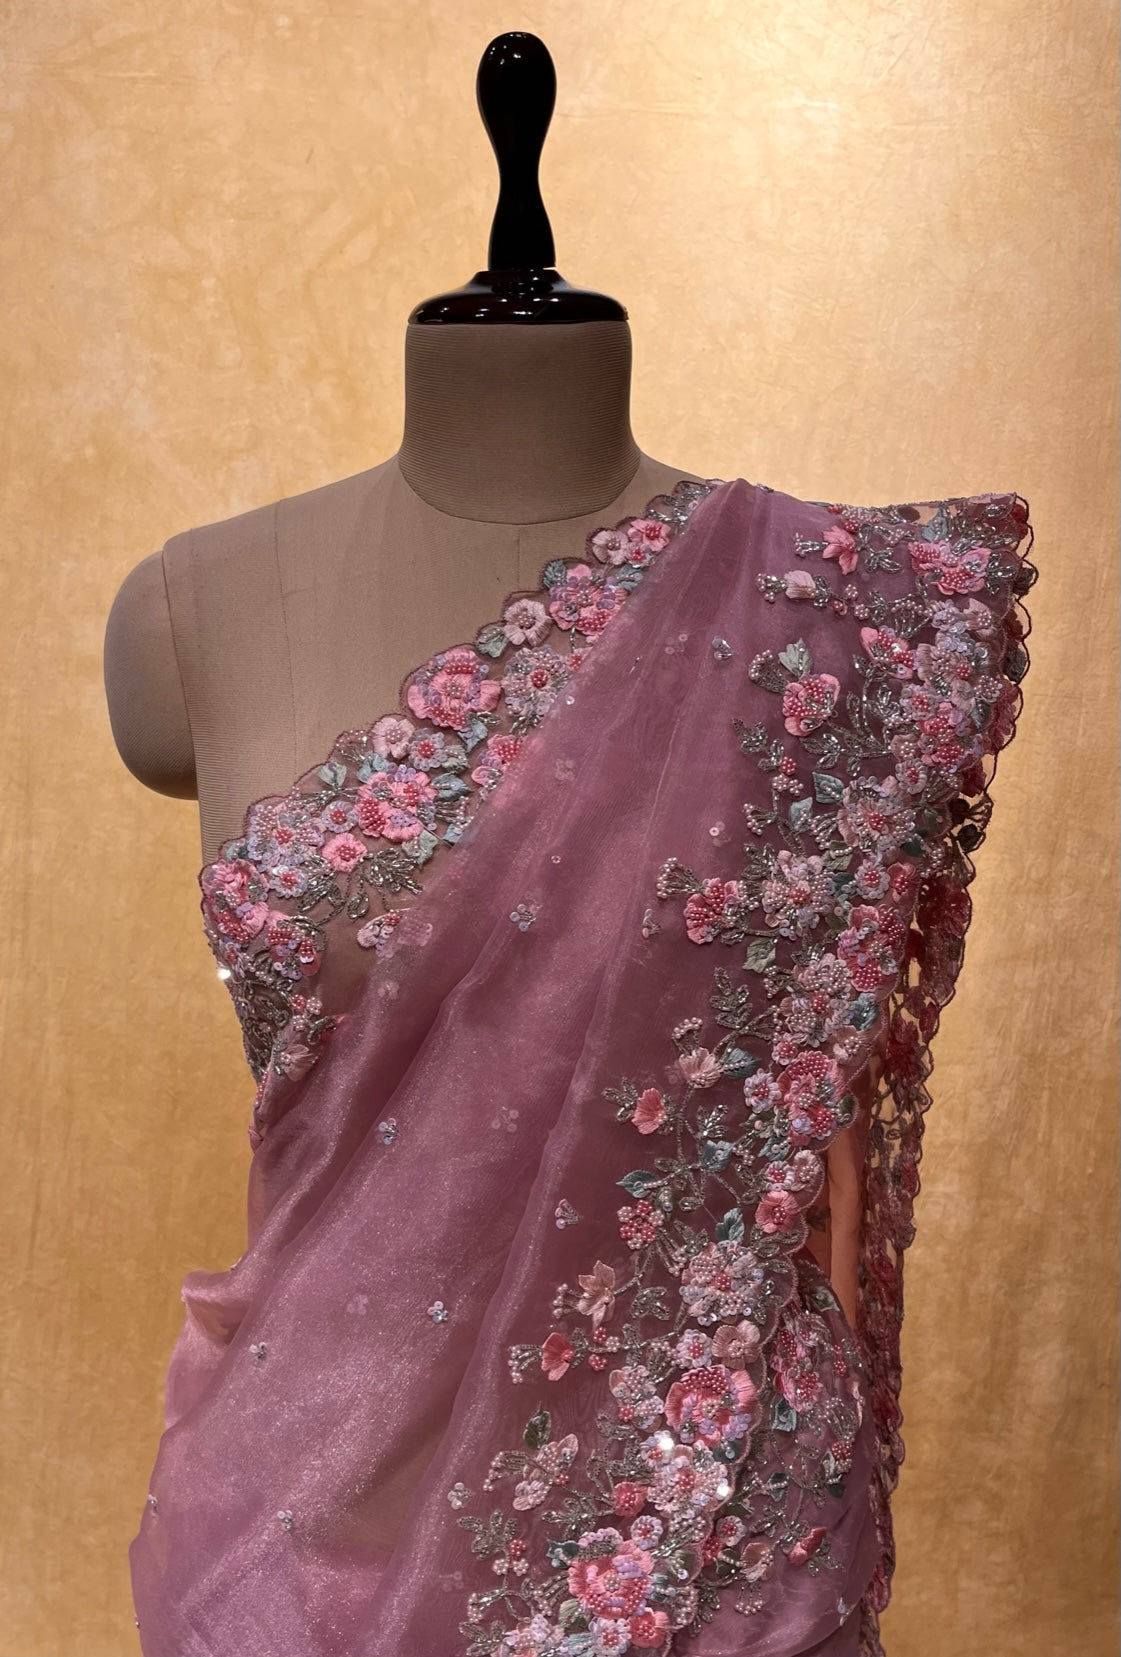 PINK COLOUR ORGANZA TISSUE HAND EMBROIDERED SAREE EMBELLISHED WITH BEADS, CUTDANA & RESHAM WORK